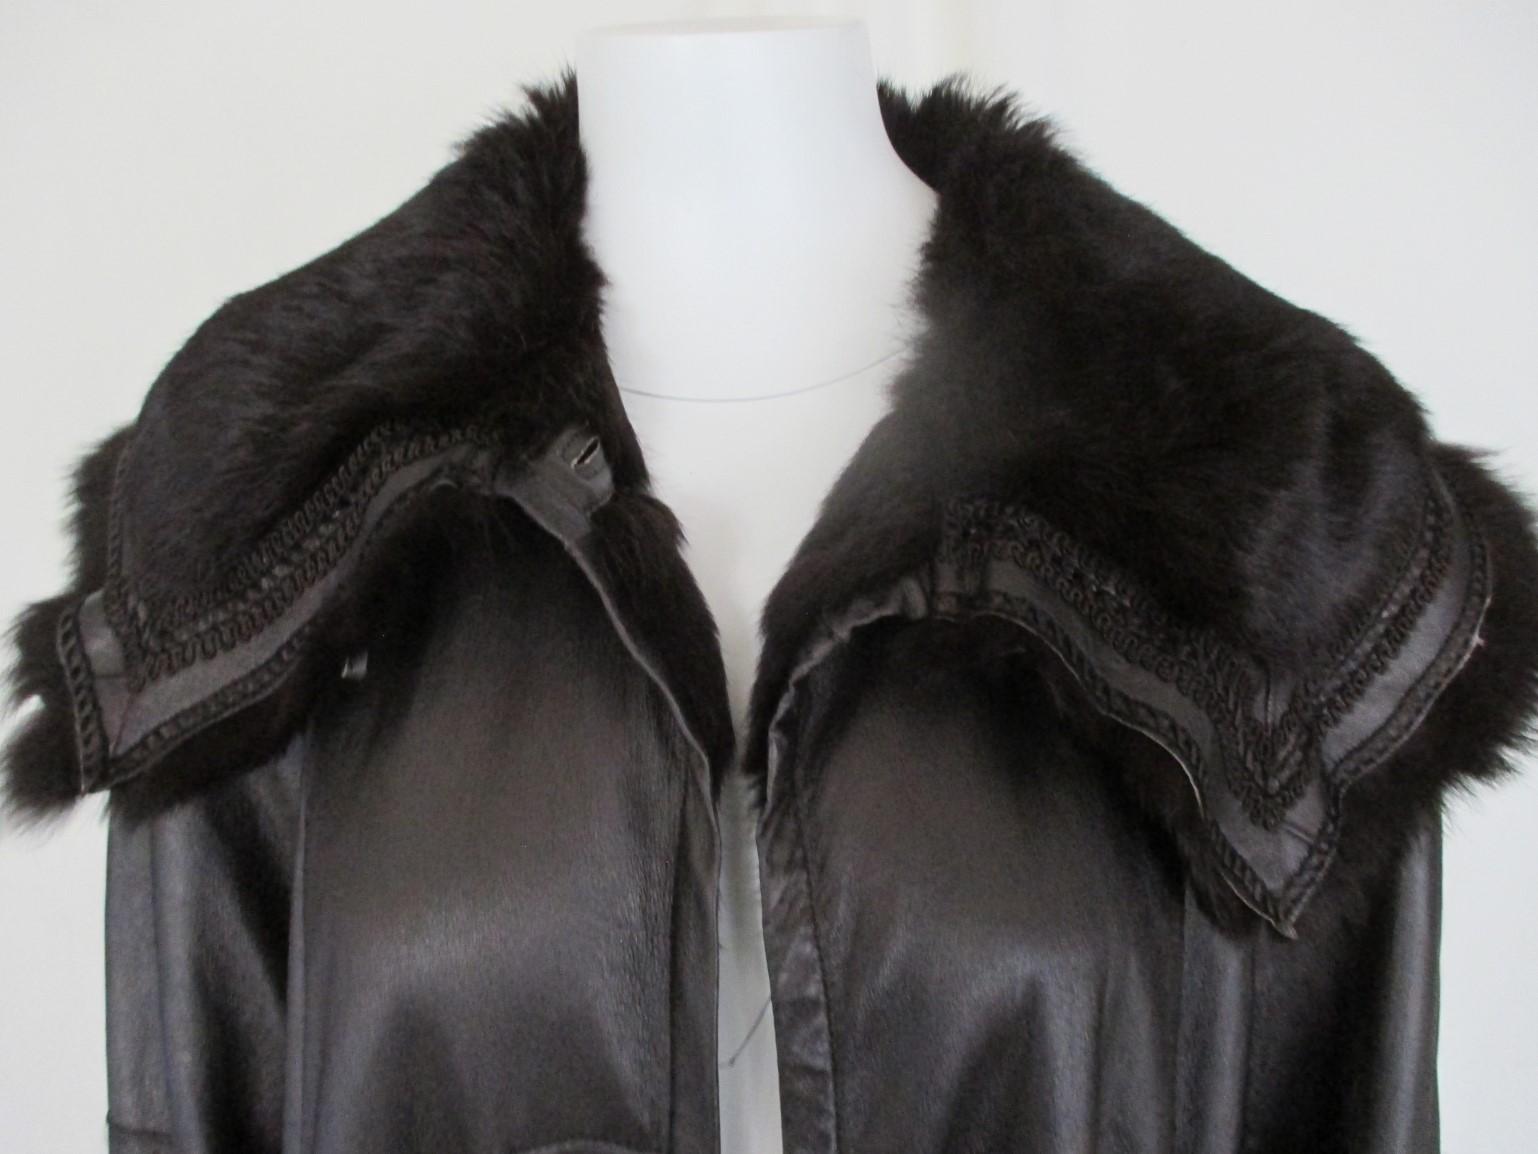 This vintage flared 3/4 length coat is made of quality soft  leather with soft fur lined and huge collar, 3 buttons and 2 leather pockets.
Color: metallic bronze brown
Easy and very light to wear.
Size fits as medium/large
(see section